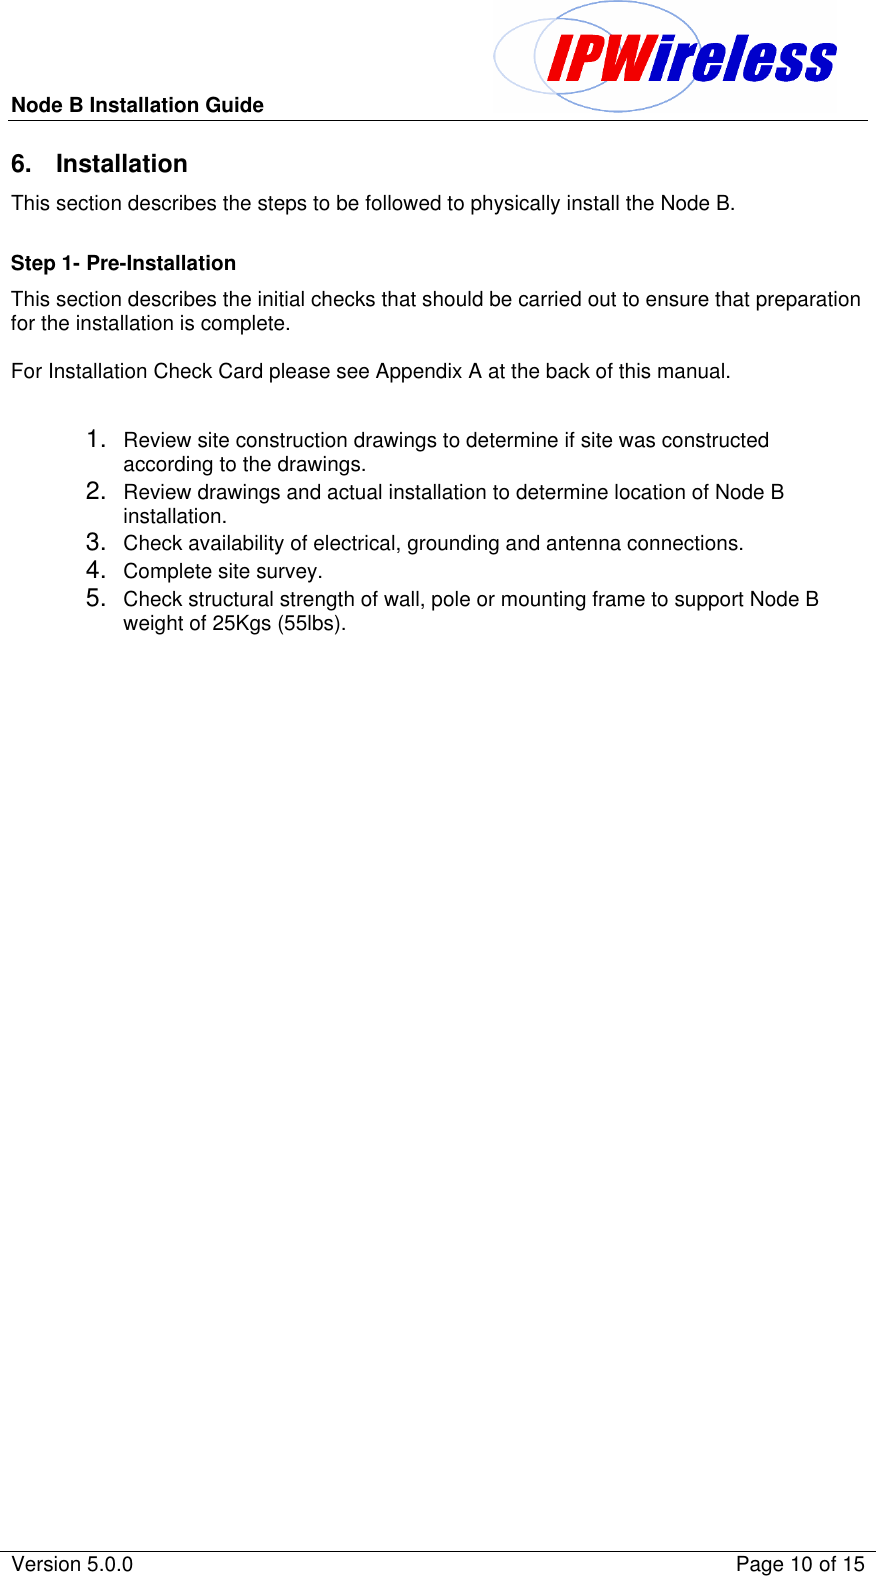 Node B Installation Guide                                               Version 5.0.0    Page 10 of 15  6. Installation This section describes the steps to be followed to physically install the Node B.  Step 1- Pre-Installation This section describes the initial checks that should be carried out to ensure that preparation  for the installation is complete.  For Installation Check Card please see Appendix A at the back of this manual.  1. Review site construction drawings to determine if site was constructed according to the drawings. 2. Review drawings and actual installation to determine location of Node B installation. 3. Check availability of electrical, grounding and antenna connections. 4. Complete site survey. 5. Check structural strength of wall, pole or mounting frame to support Node B weight of 25Kgs (55lbs).   